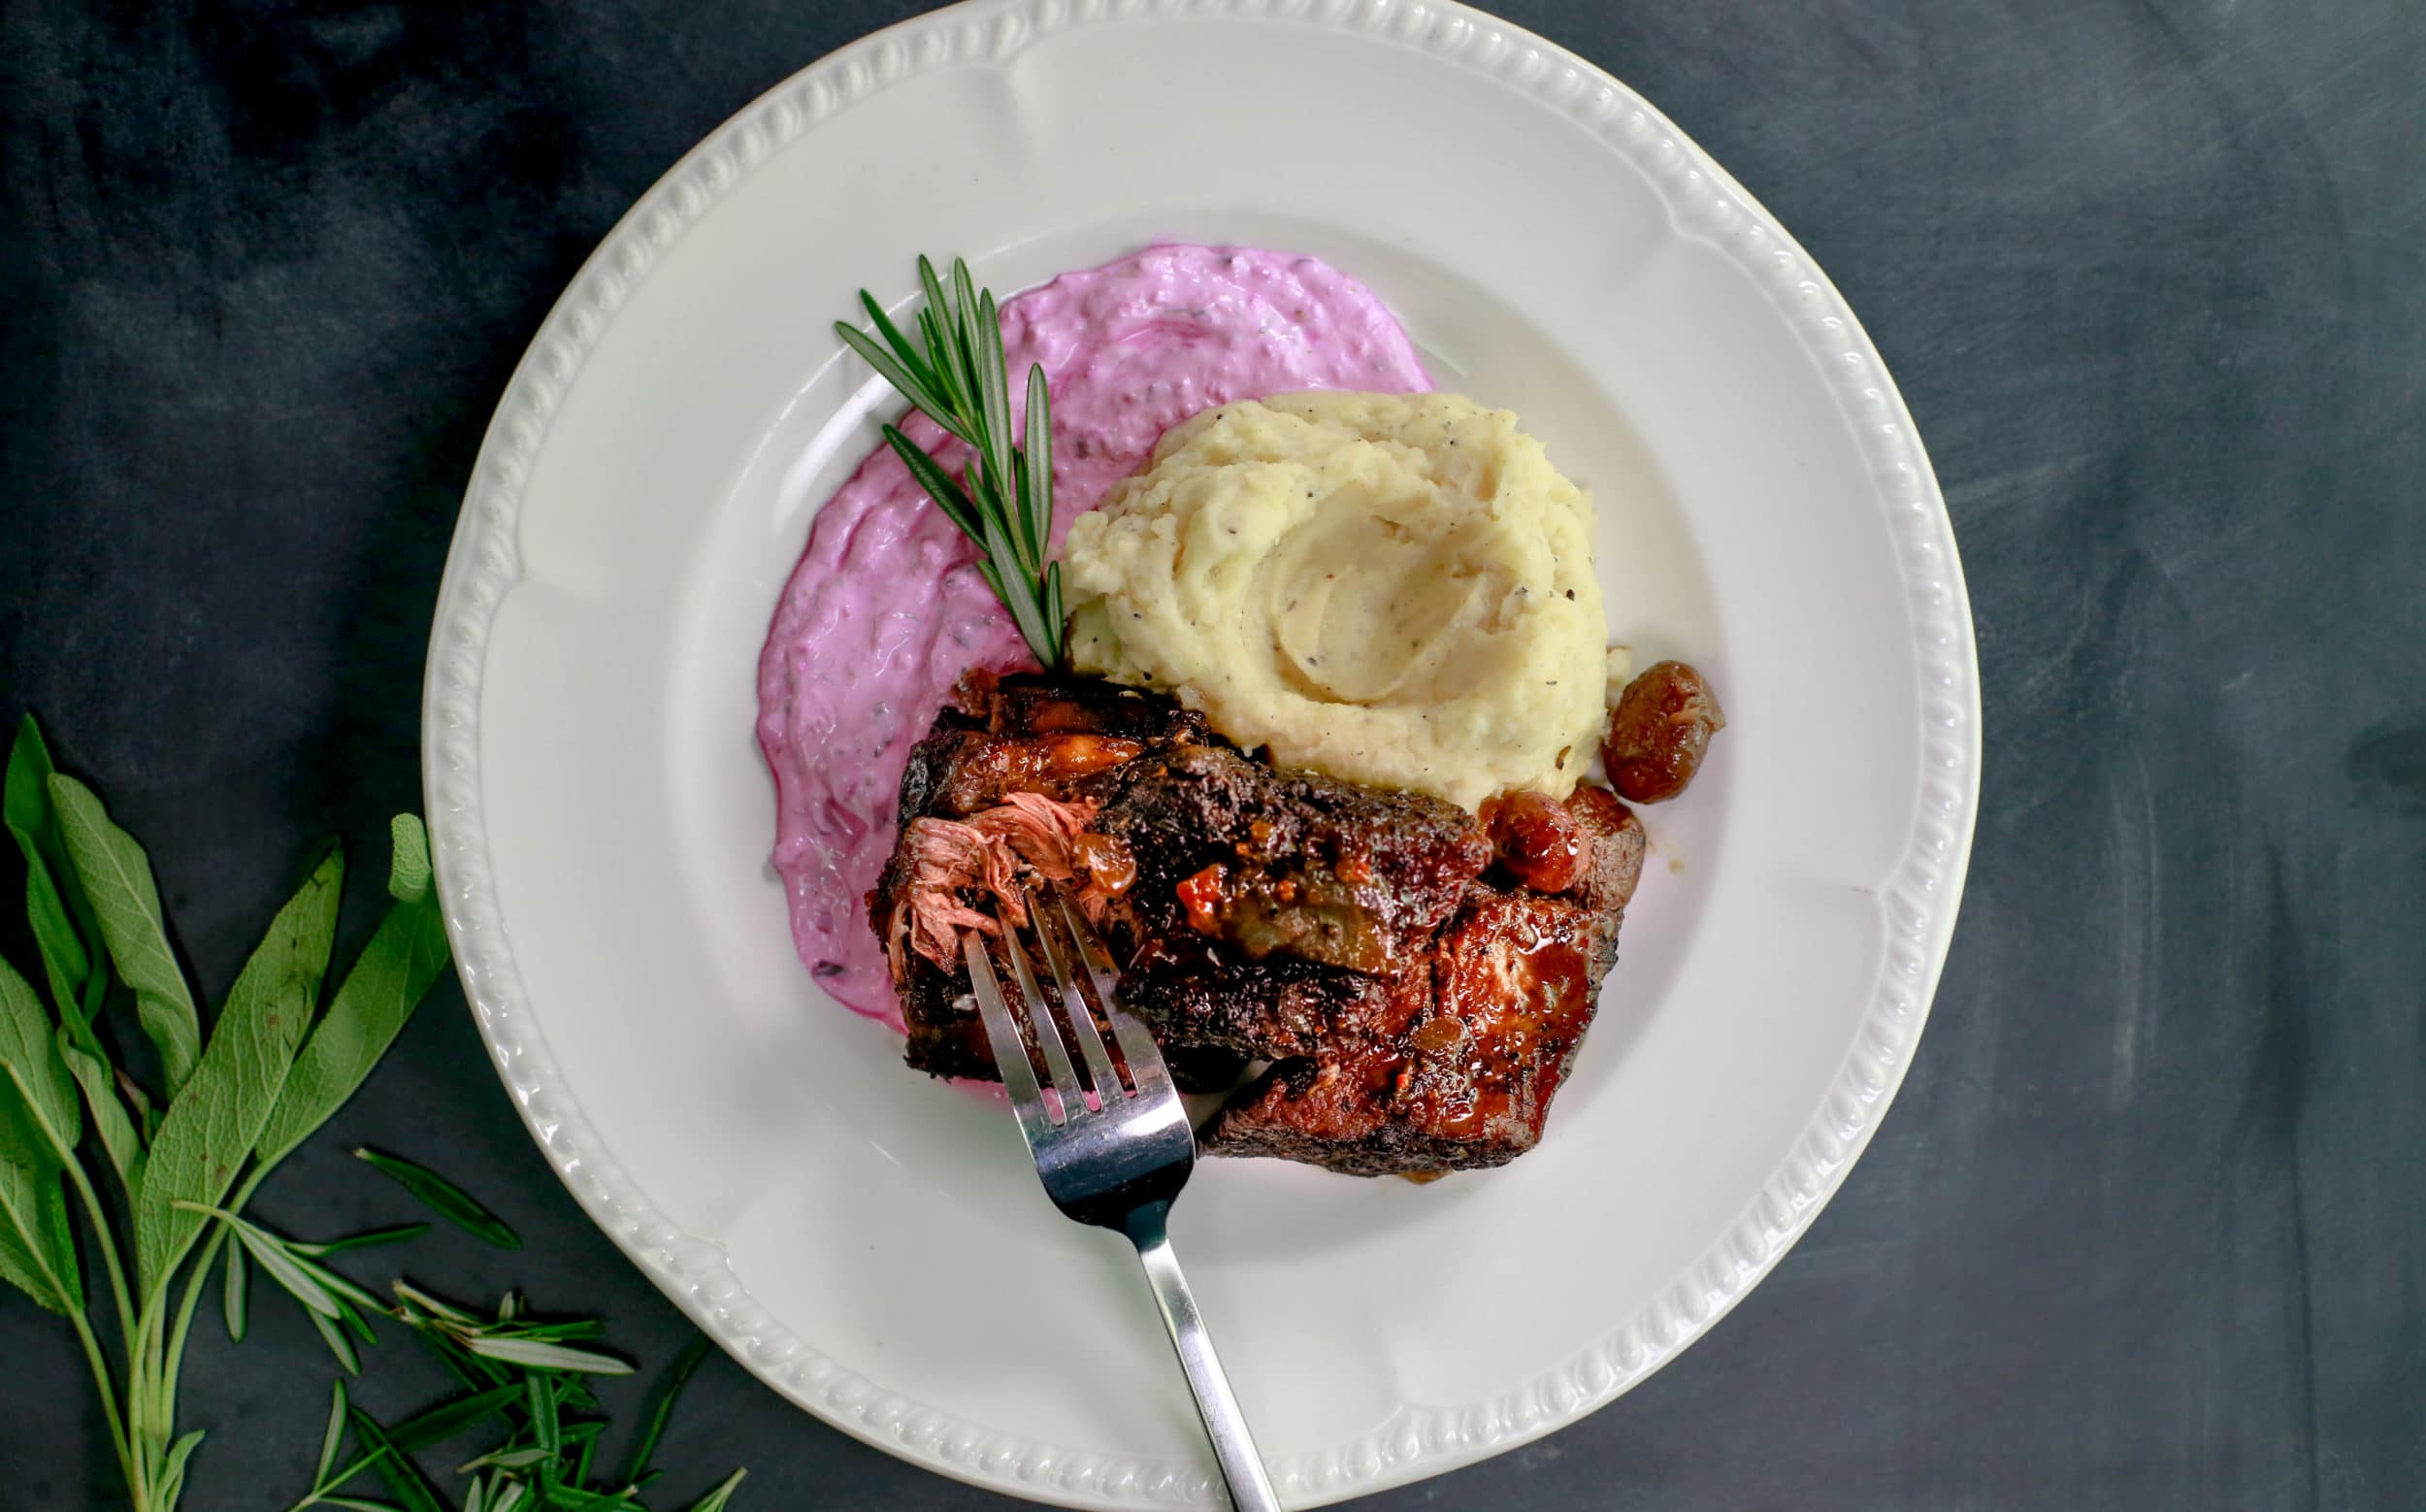 Sweet and Sour (‘Agrodolce’) Braised Beef Short Ribs with Pink Horseradish Cream